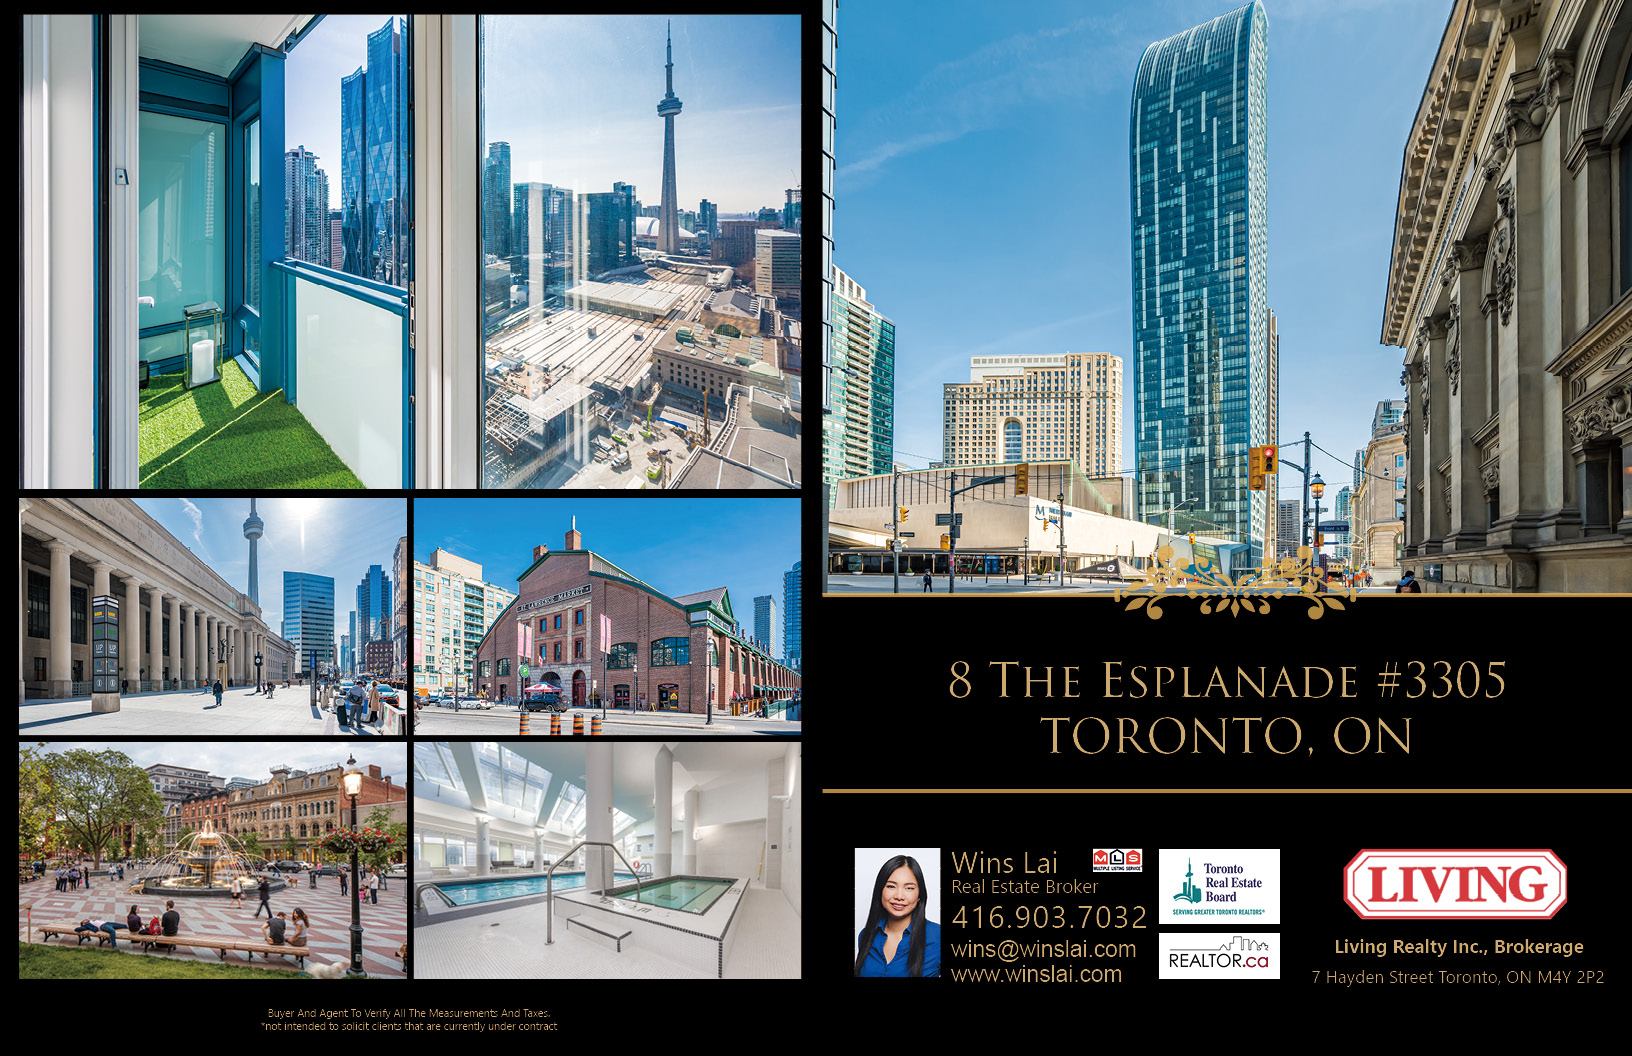 Brochure of 8 The Esplande Ave with photos of building and neighbourhood.